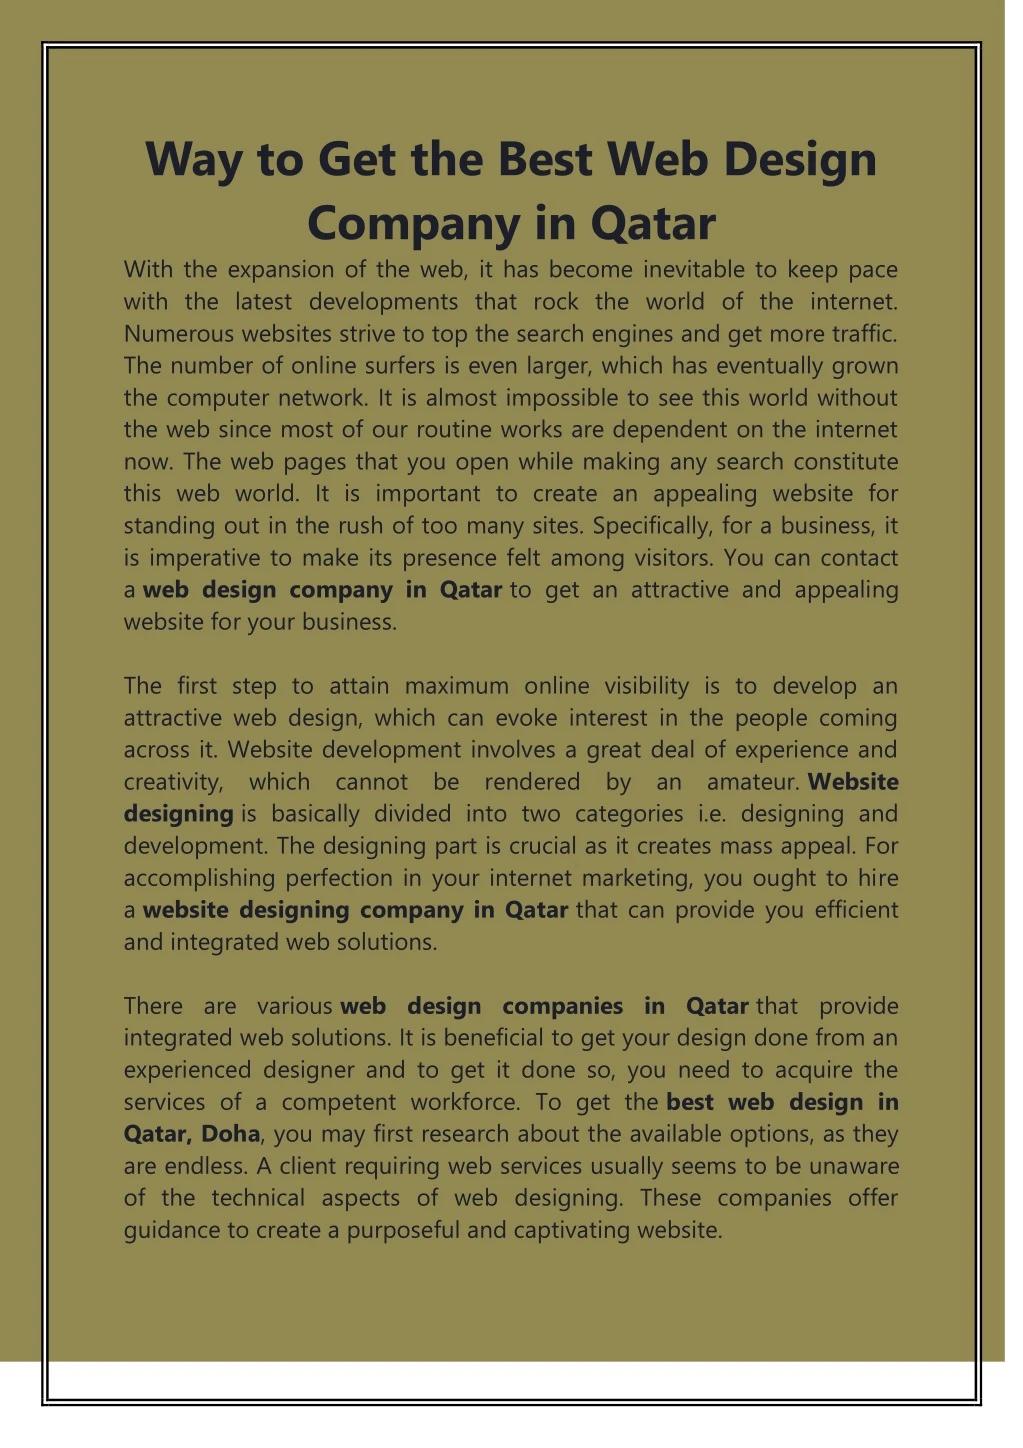 way to get the best web design company in qatar